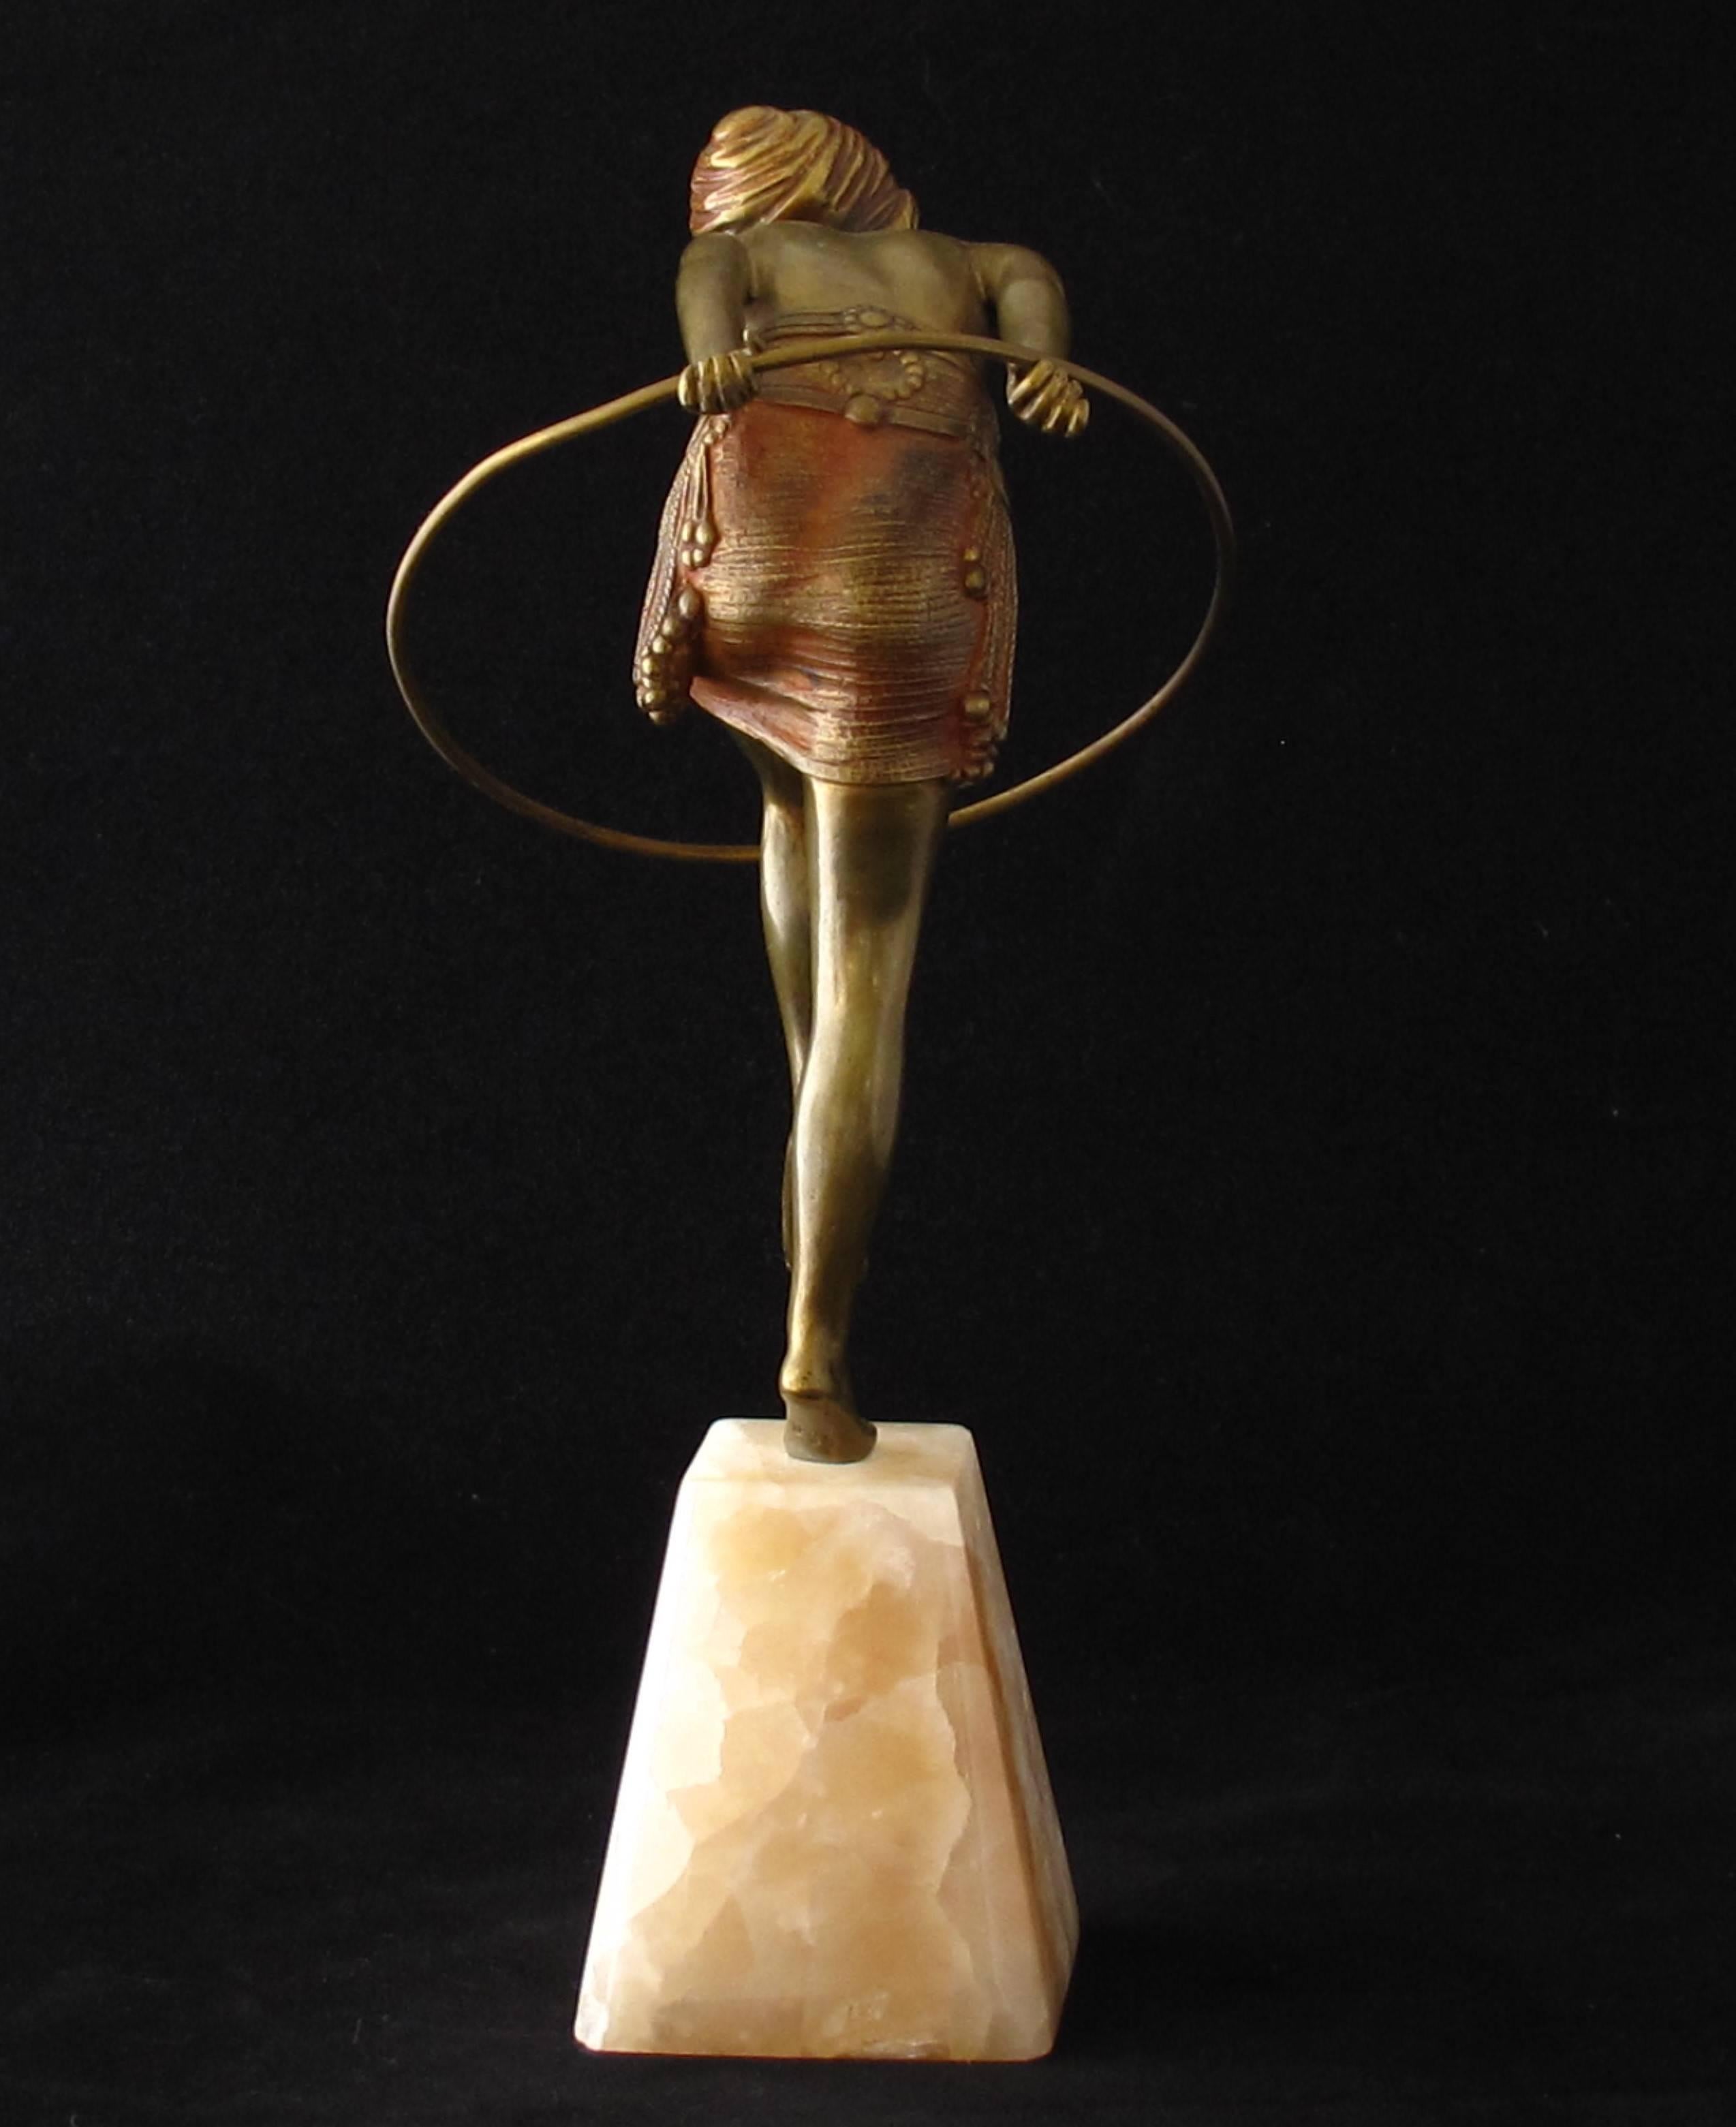 Art Deco bronze figure of a dancer with hoop. Gilt and cold painted with her arms outstretched behind her, stepping through a hoop. Signed Chiparus in the marble base. Approx height 25 cm. French c 1925 - Excellent original condition. A similar